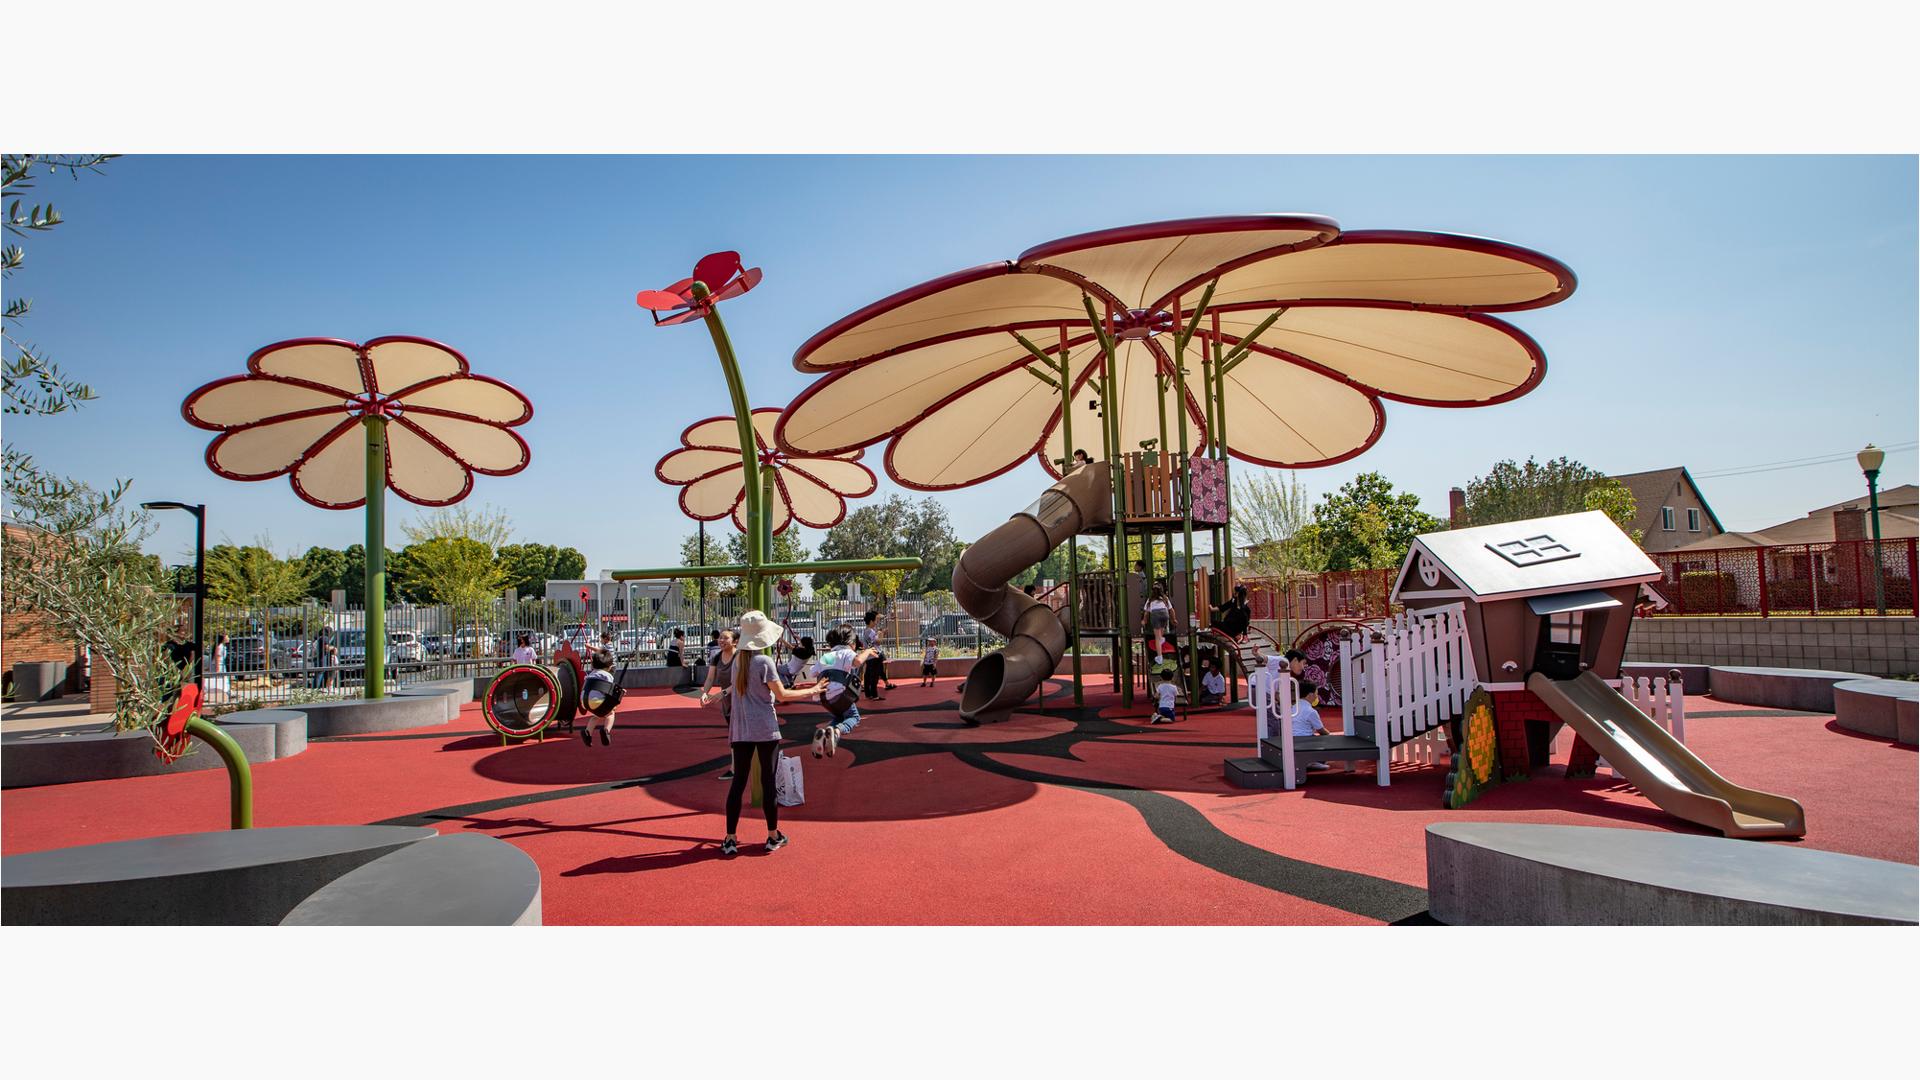 Families play on a playground tower with a large flower shaped shade. Smaller play structures surround the large play tower along with two more large flower shaped shade posts.